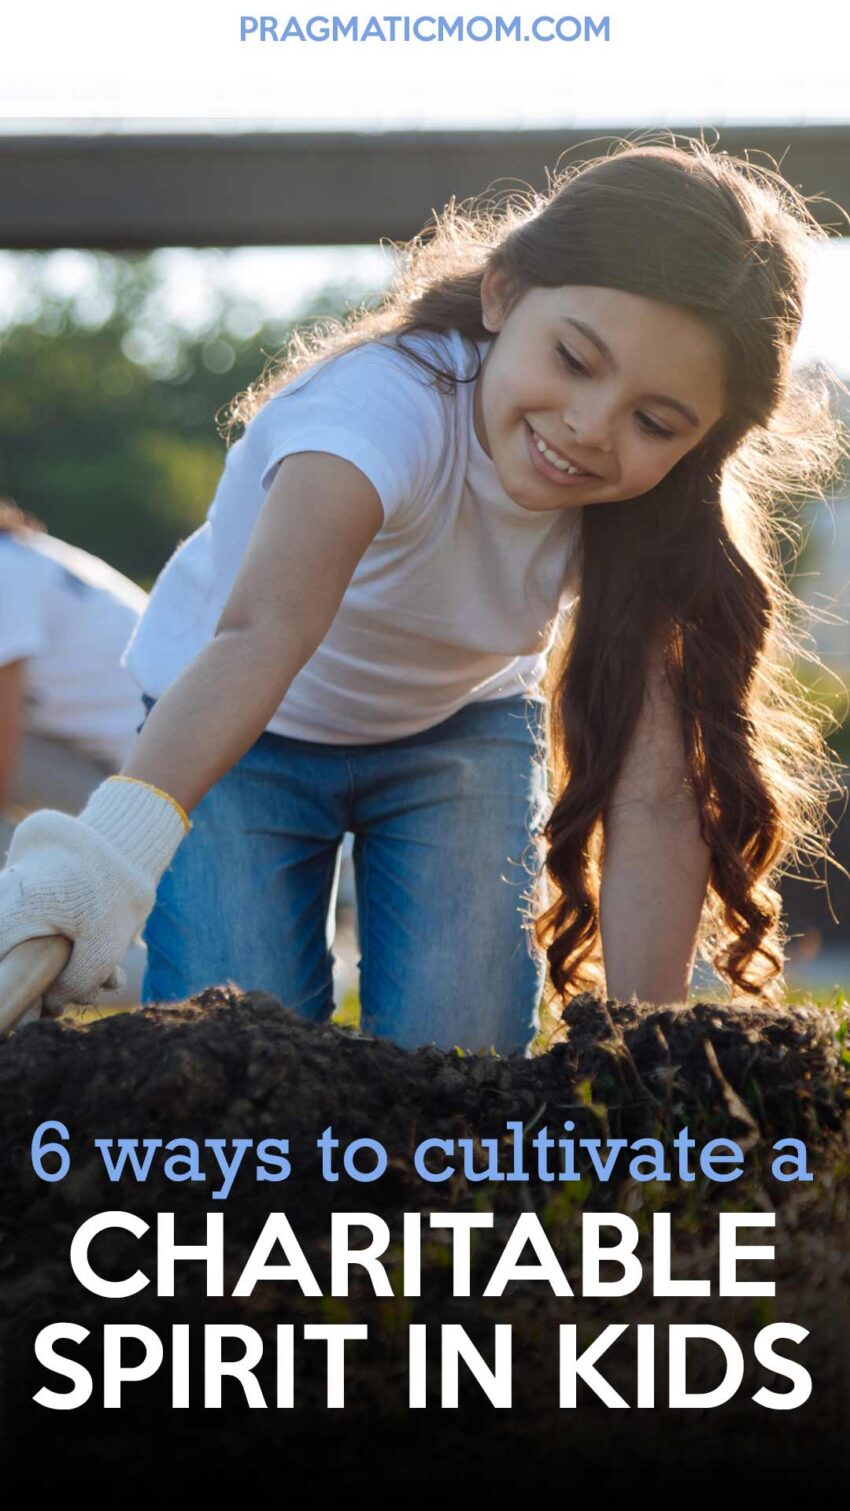 Six Ways to Cultivate a Charitable Spirit in Kids